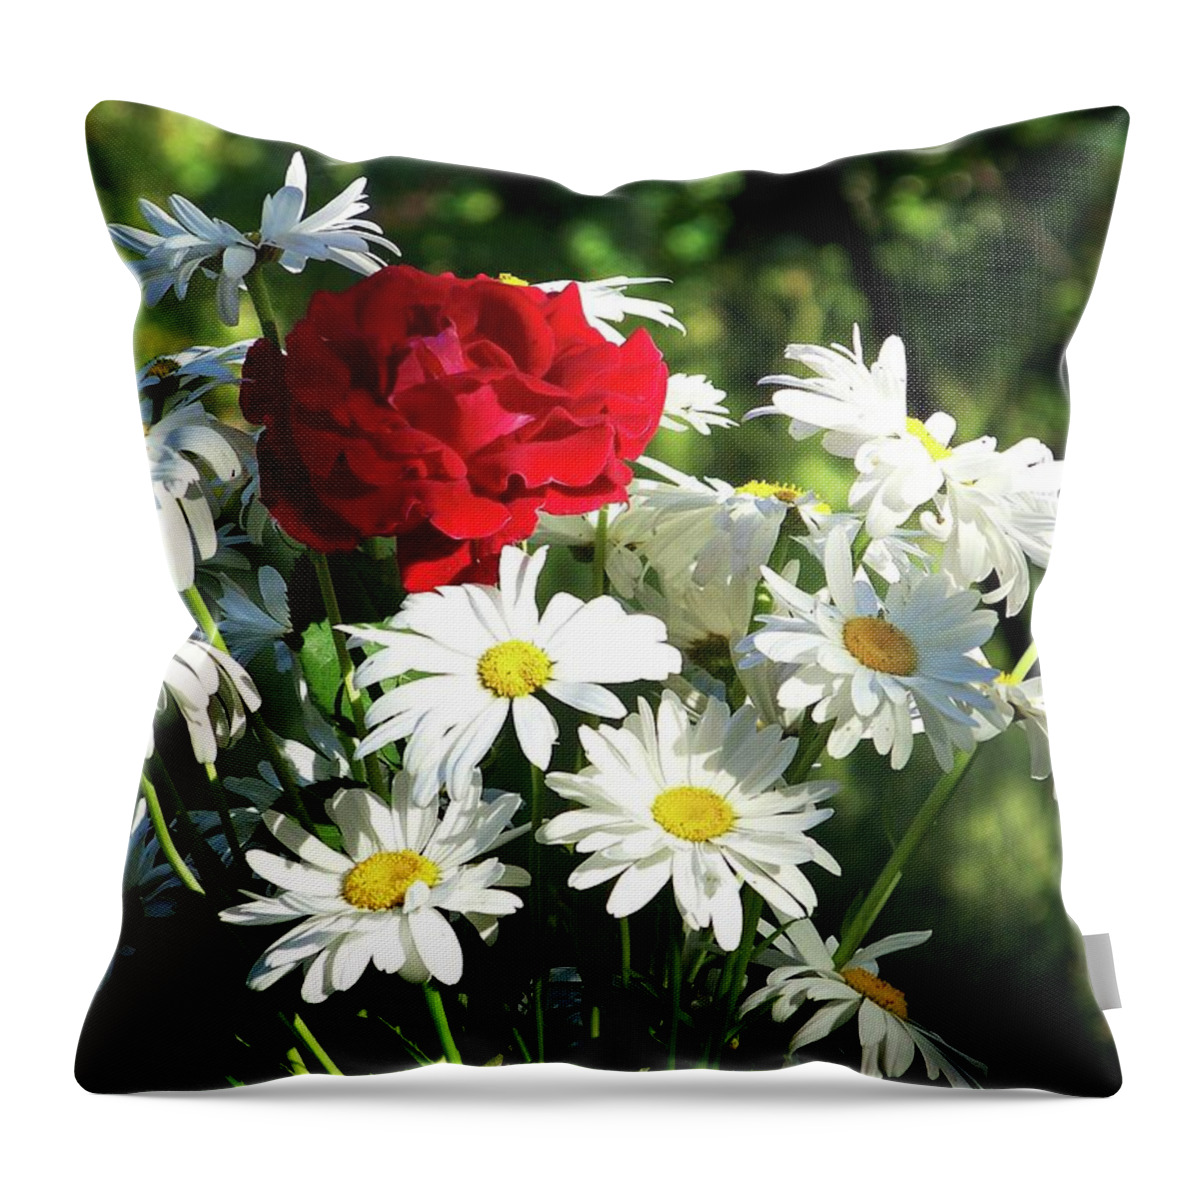 Flowers Throw Pillow featuring the photograph He Loves Me... by Julie Rauscher